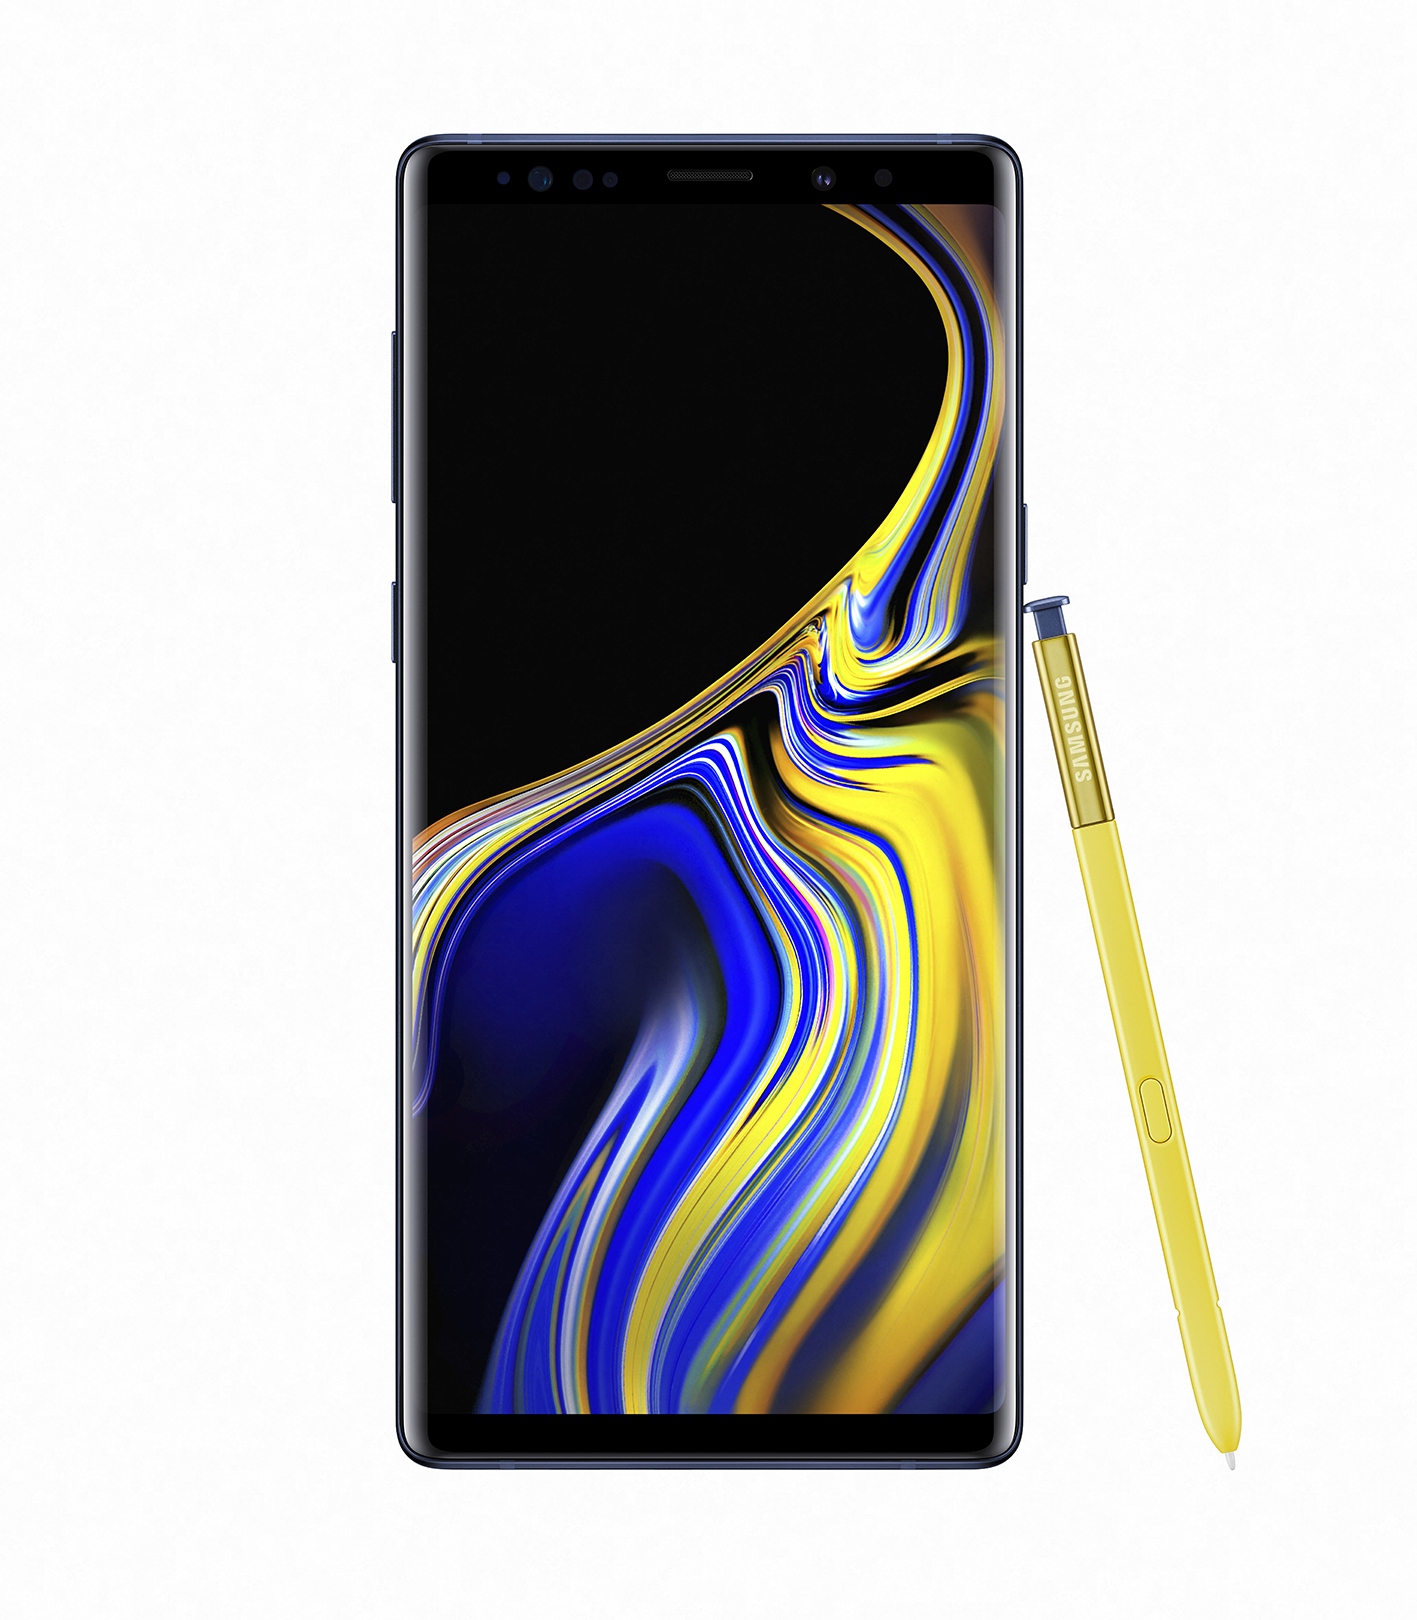 Get the new SAMSUNG Galaxy Note9 in stores now!